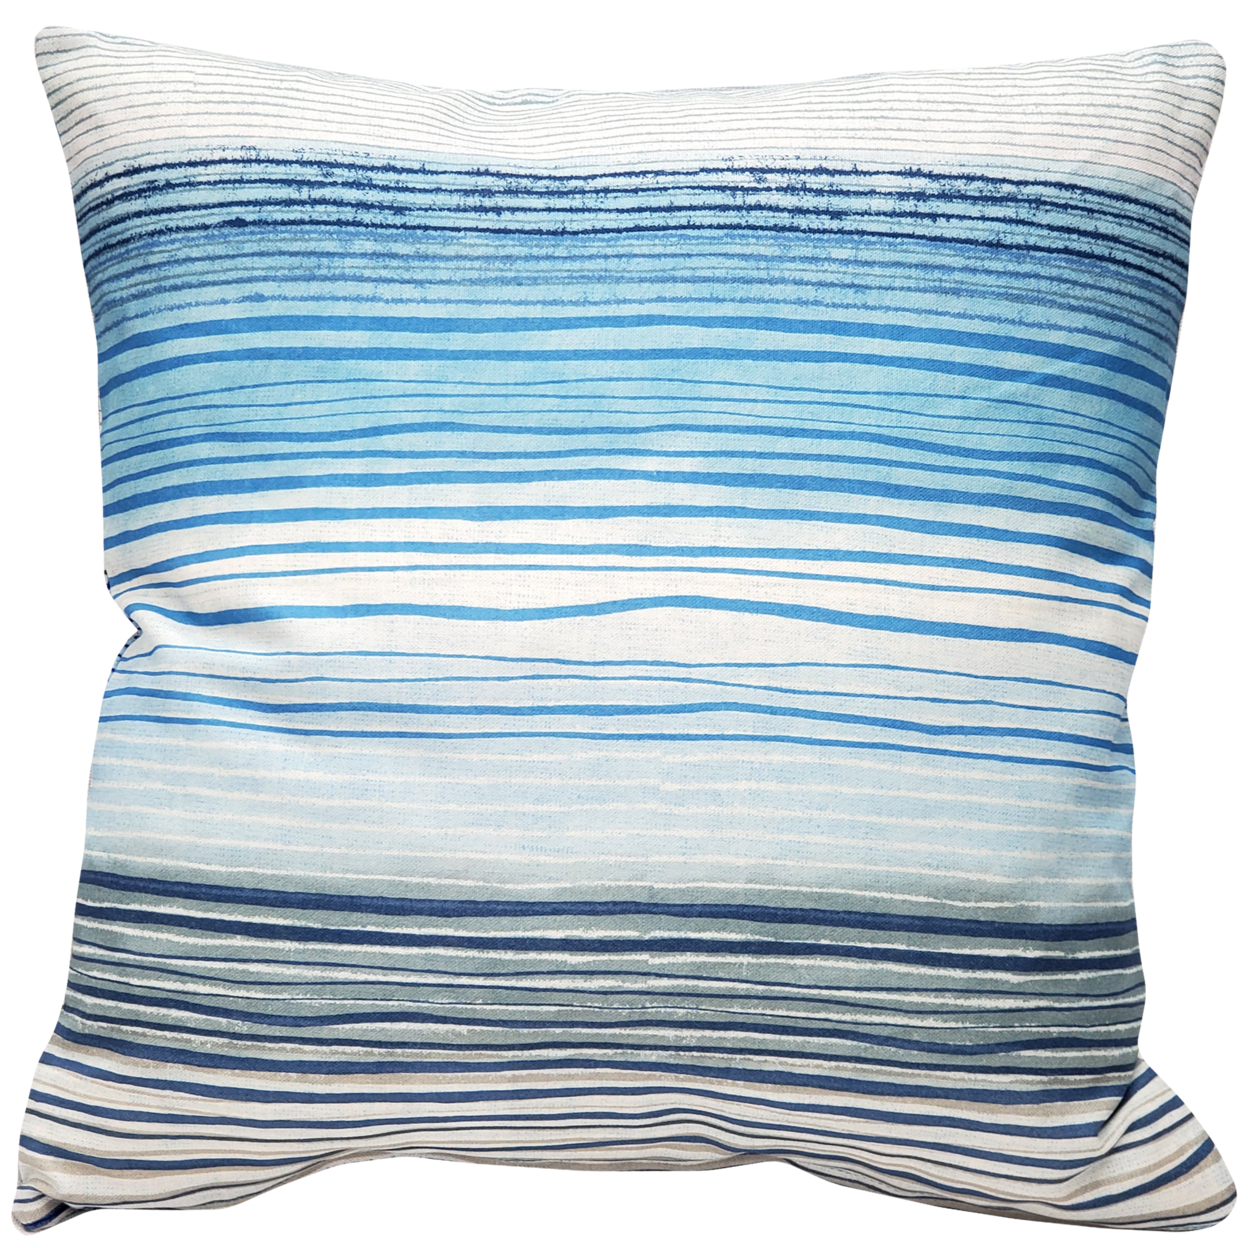 Sedona Stripes Blue Throw Pillow 20x20 Inches Square, Complete Pillow With Polyfill Pillow Insert